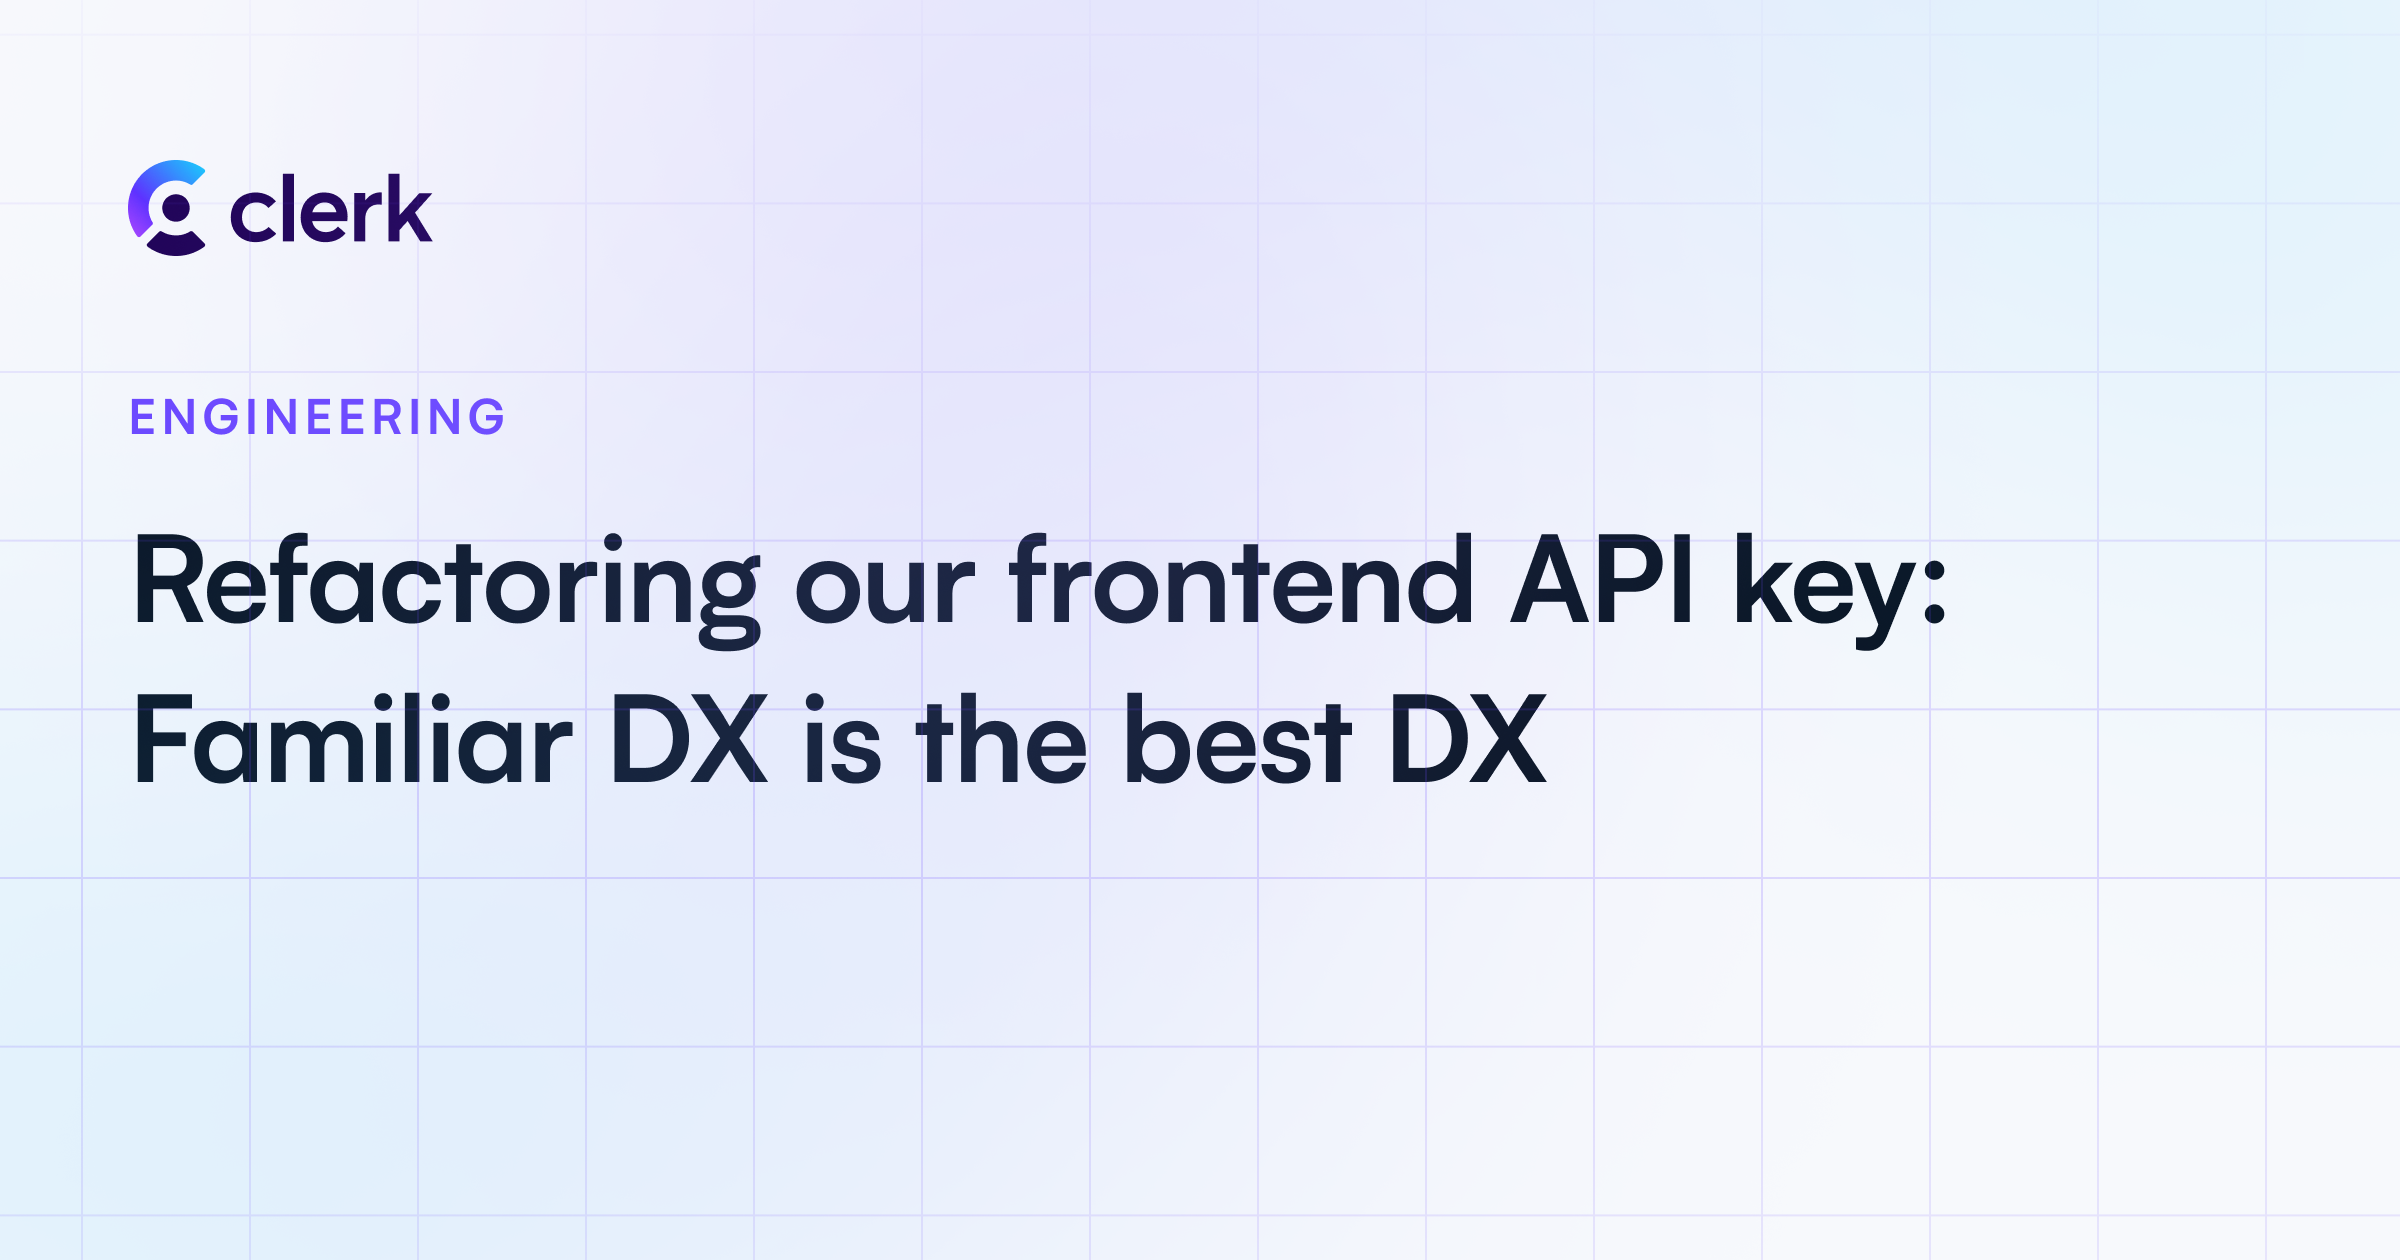 Refactoring our frontend API key: Familiar DX is the best DX